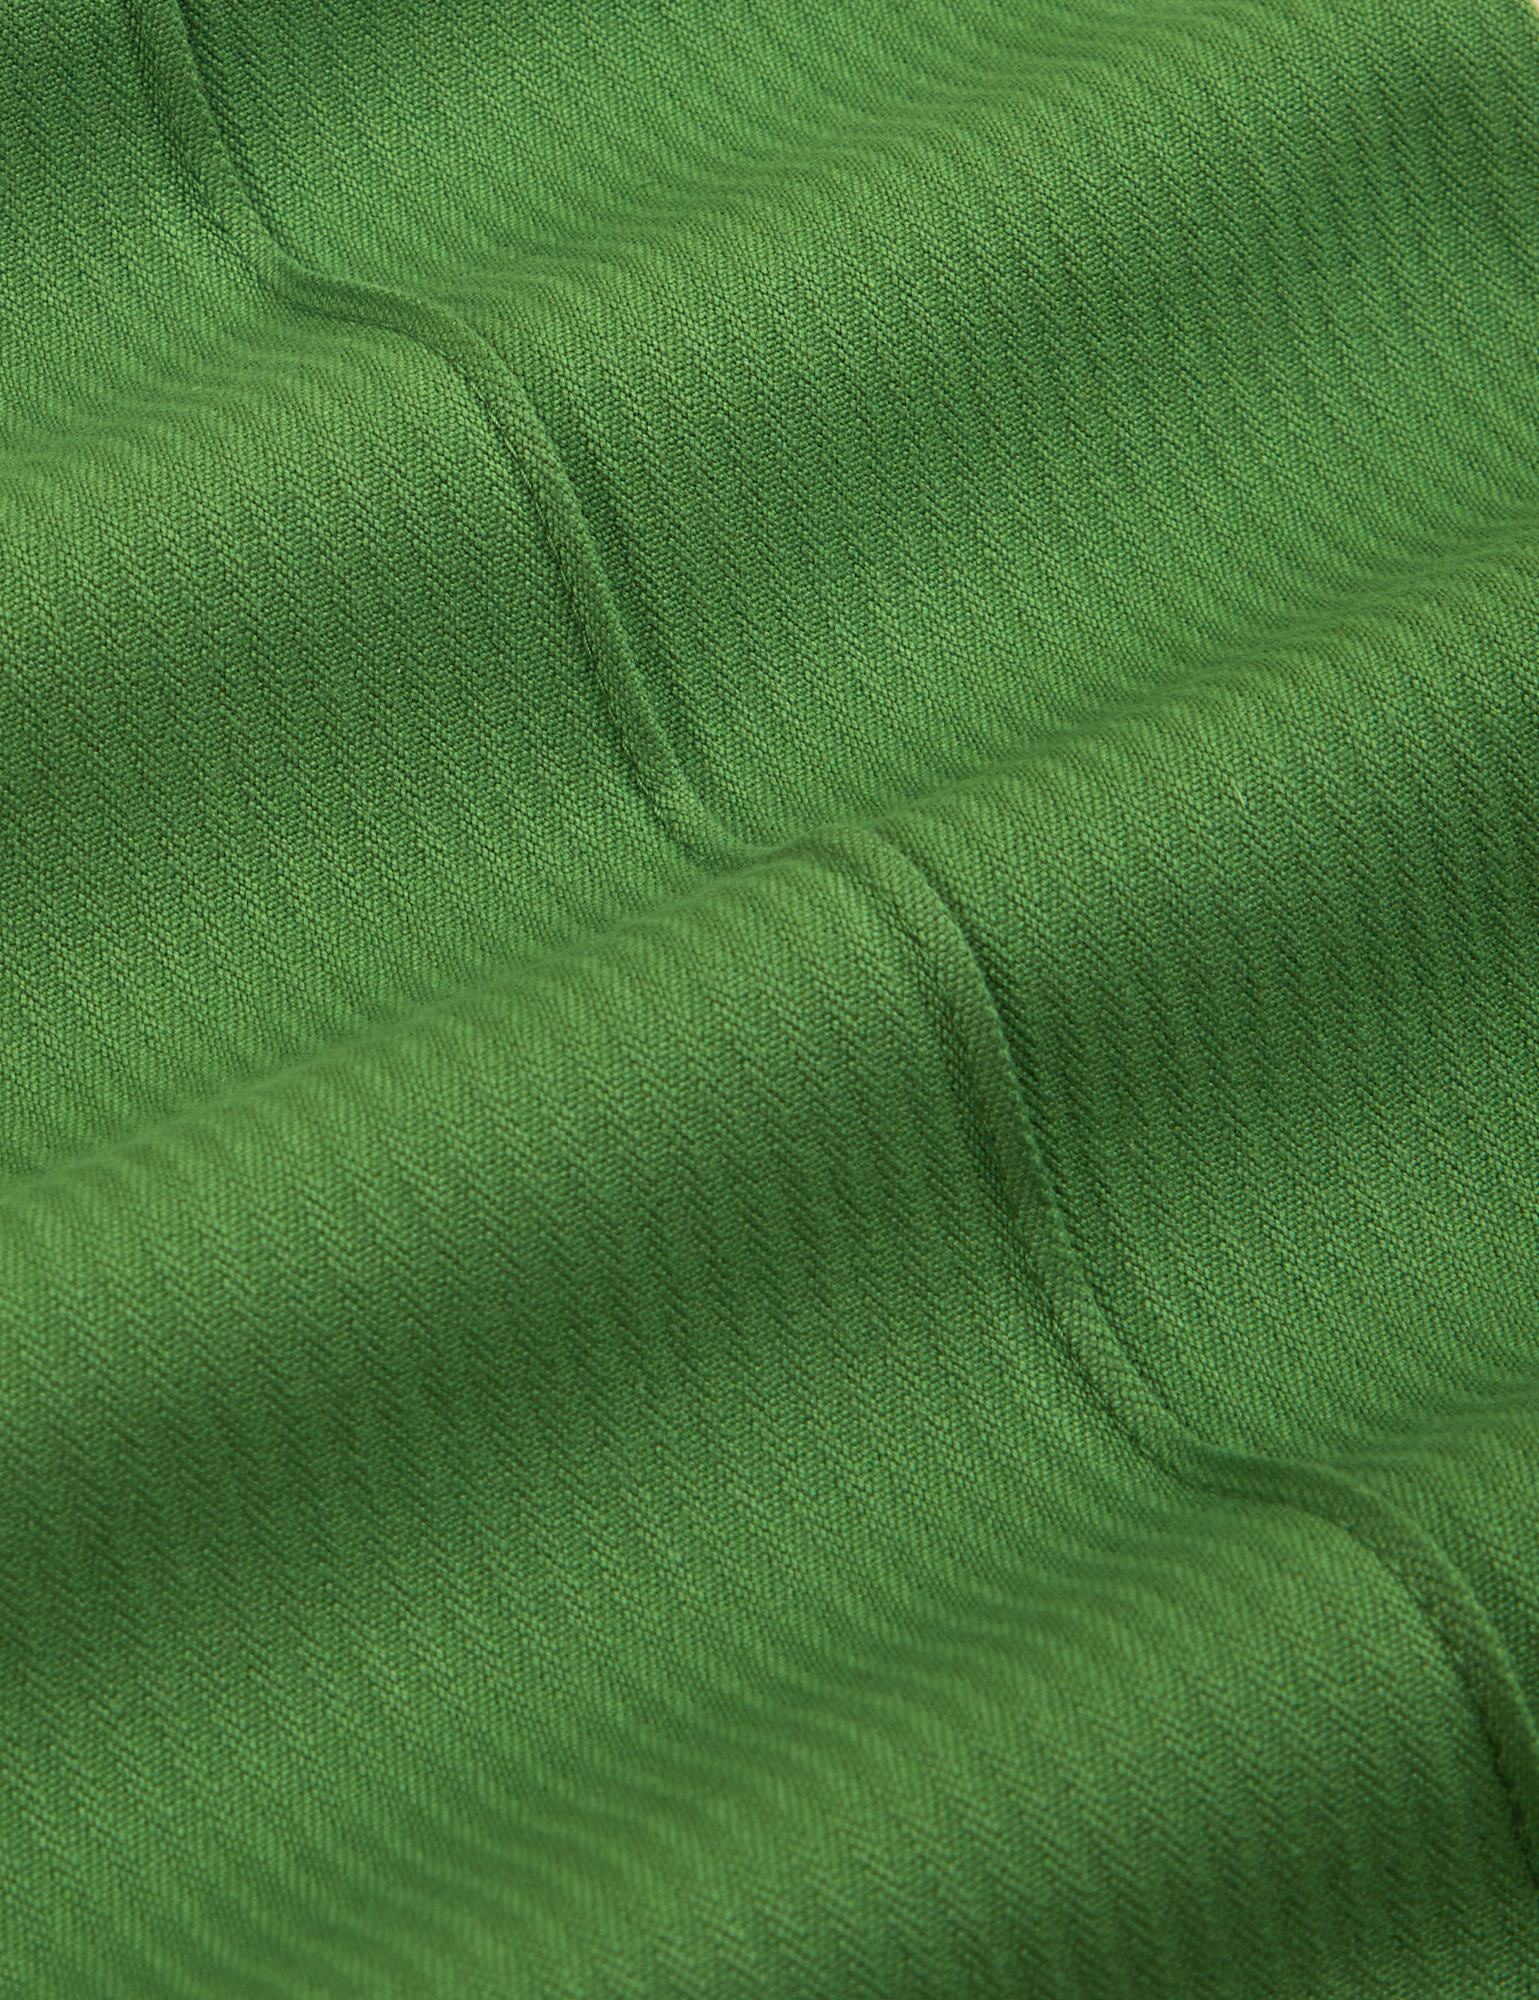 Heritage Westerns in Lawn Green fabric detail close up